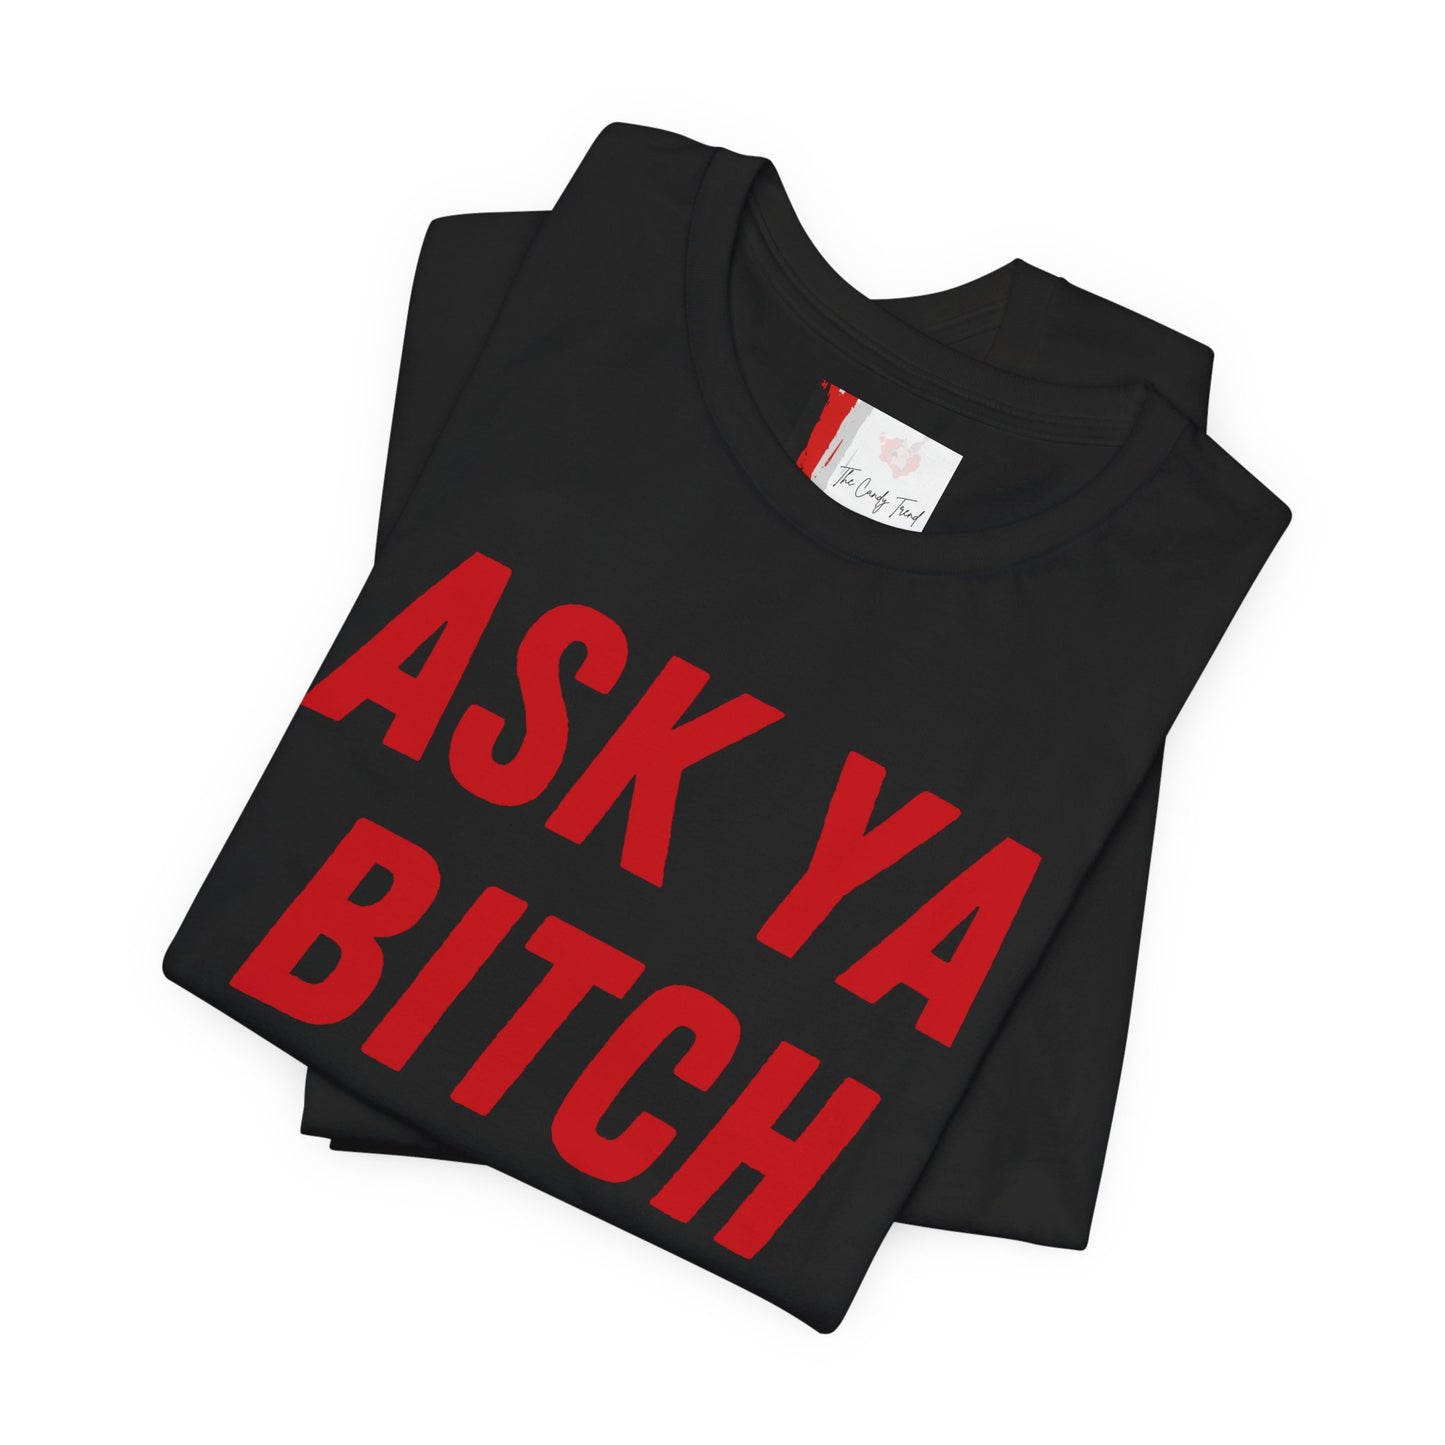 ASK YOUR BITCH TSHIRT